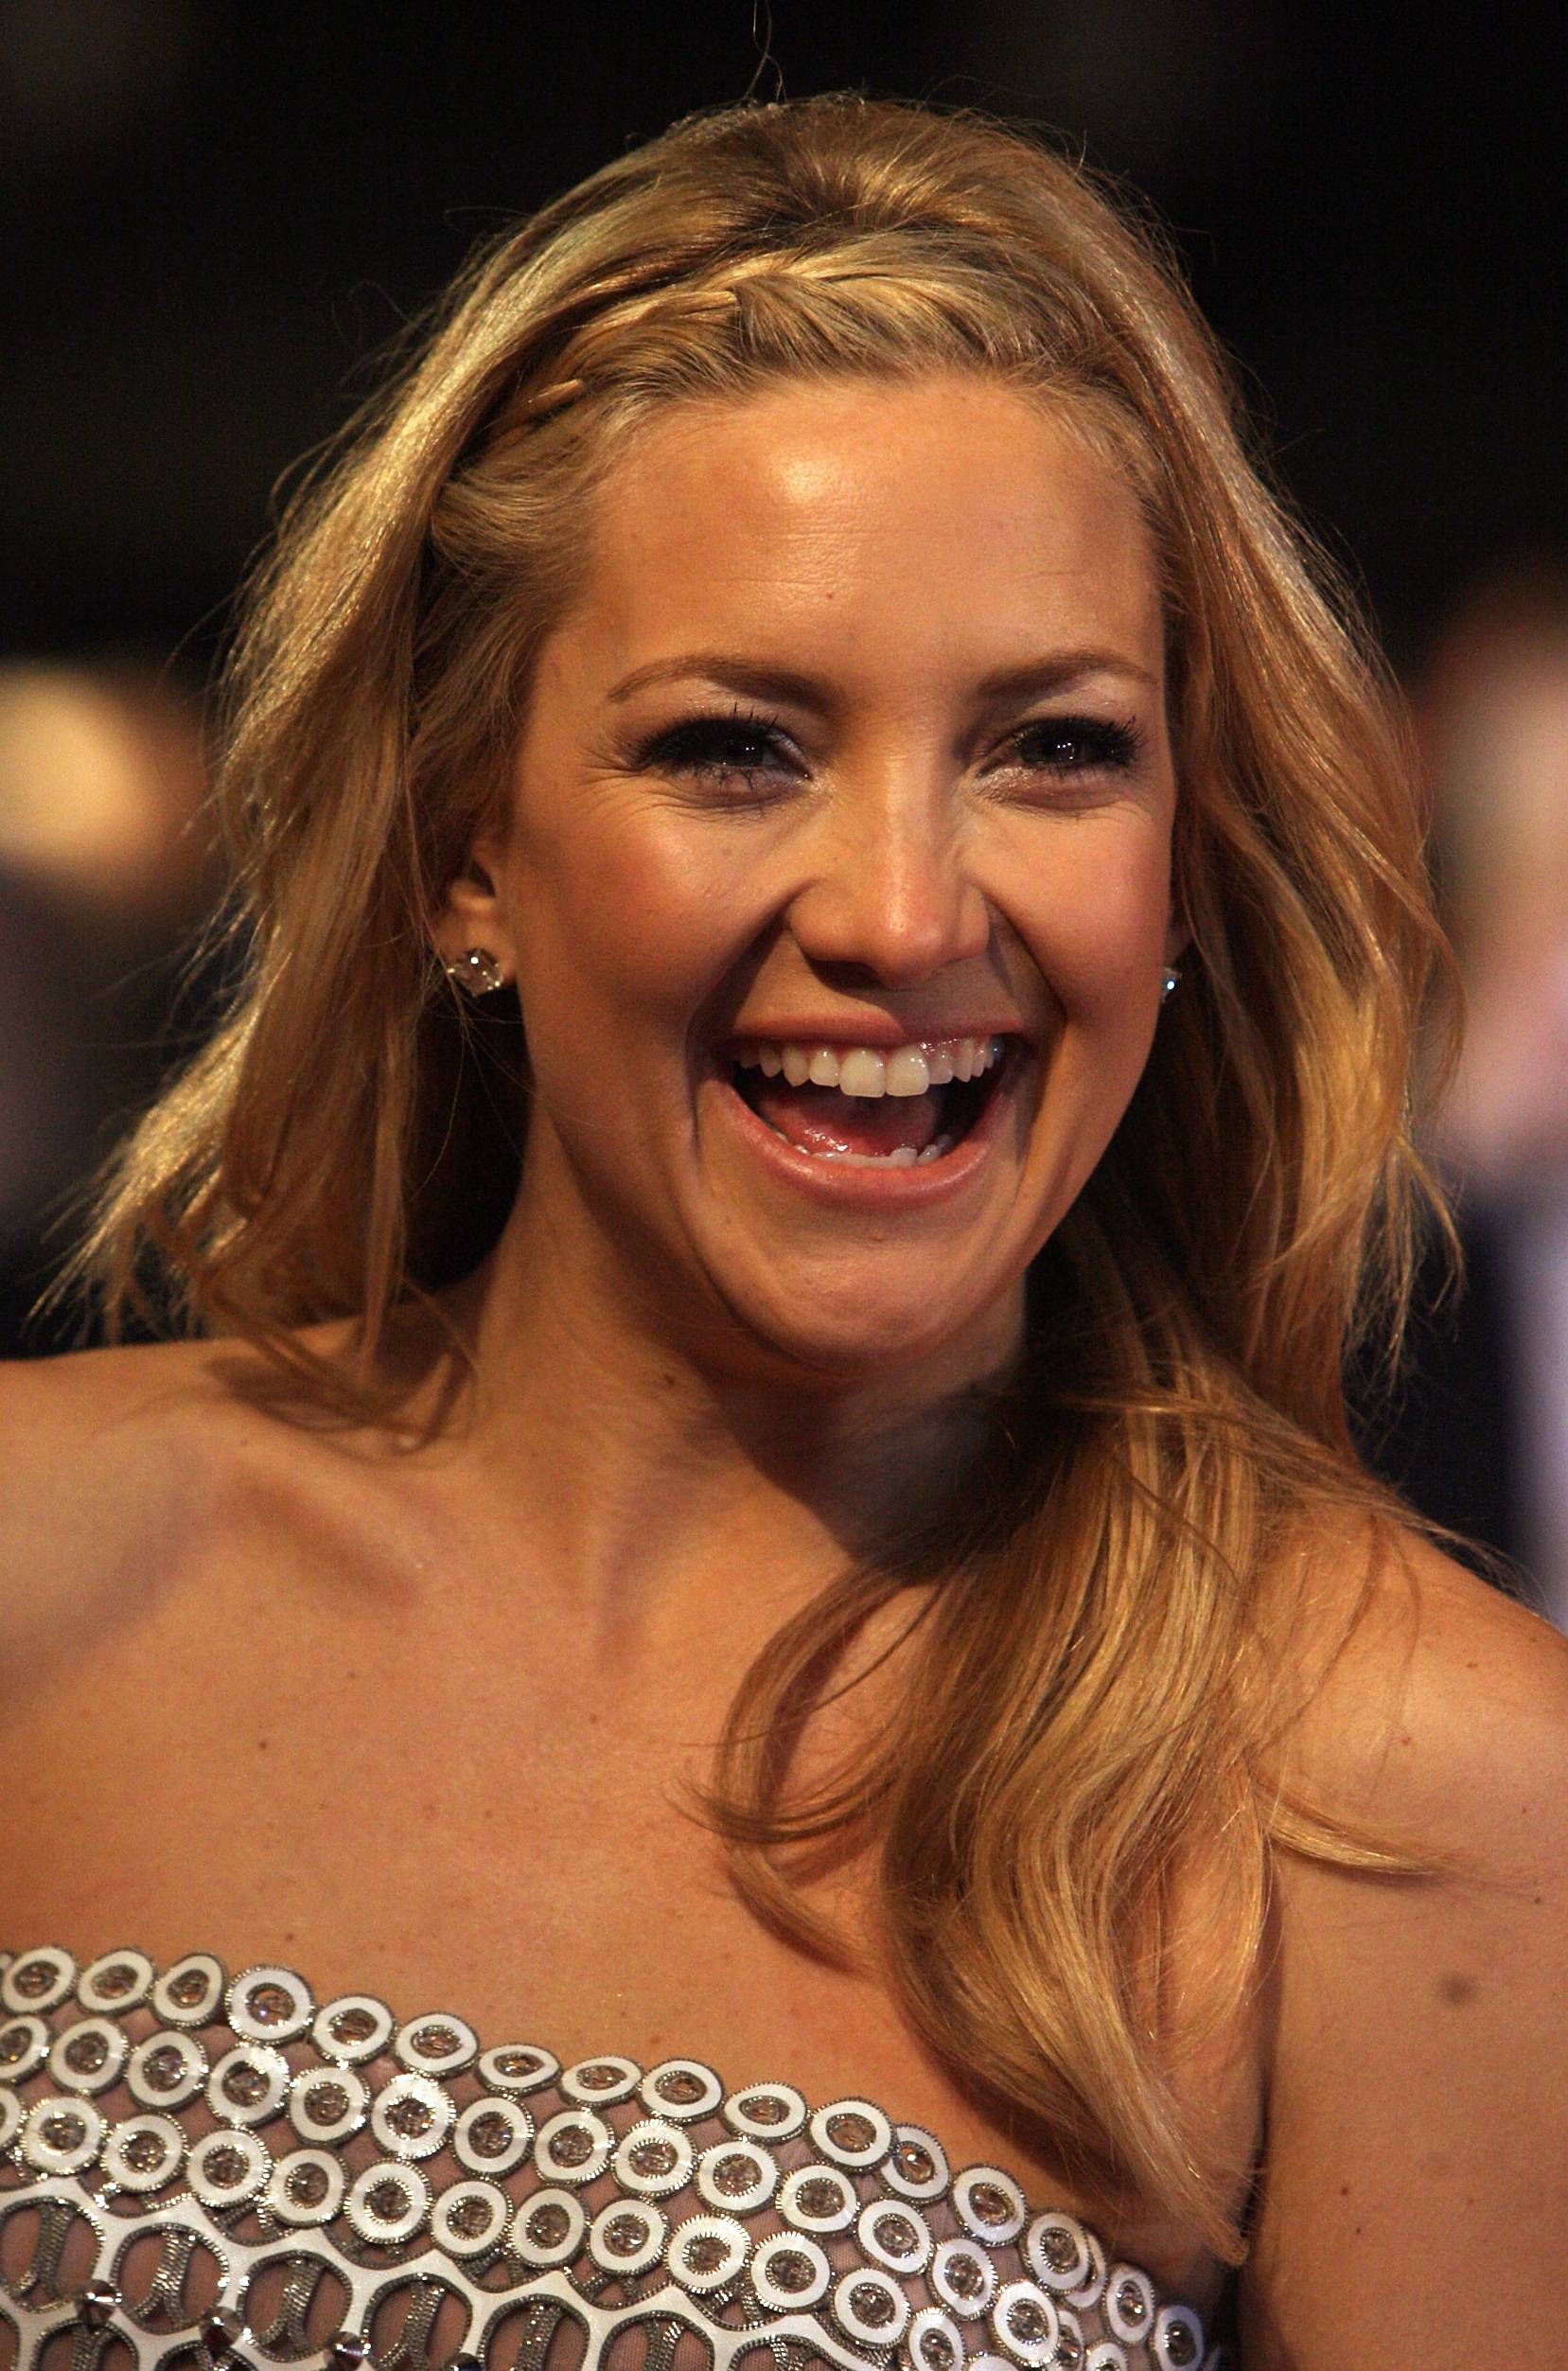 LONDON, ENGLAND - DECEMBER 03: Actress Kate Hudson attends the World Premiere of 'Nine' at Odeon Leicester Square on December 3, 2009 in London, England. (Photo by Chris Jackson/Getty Images)